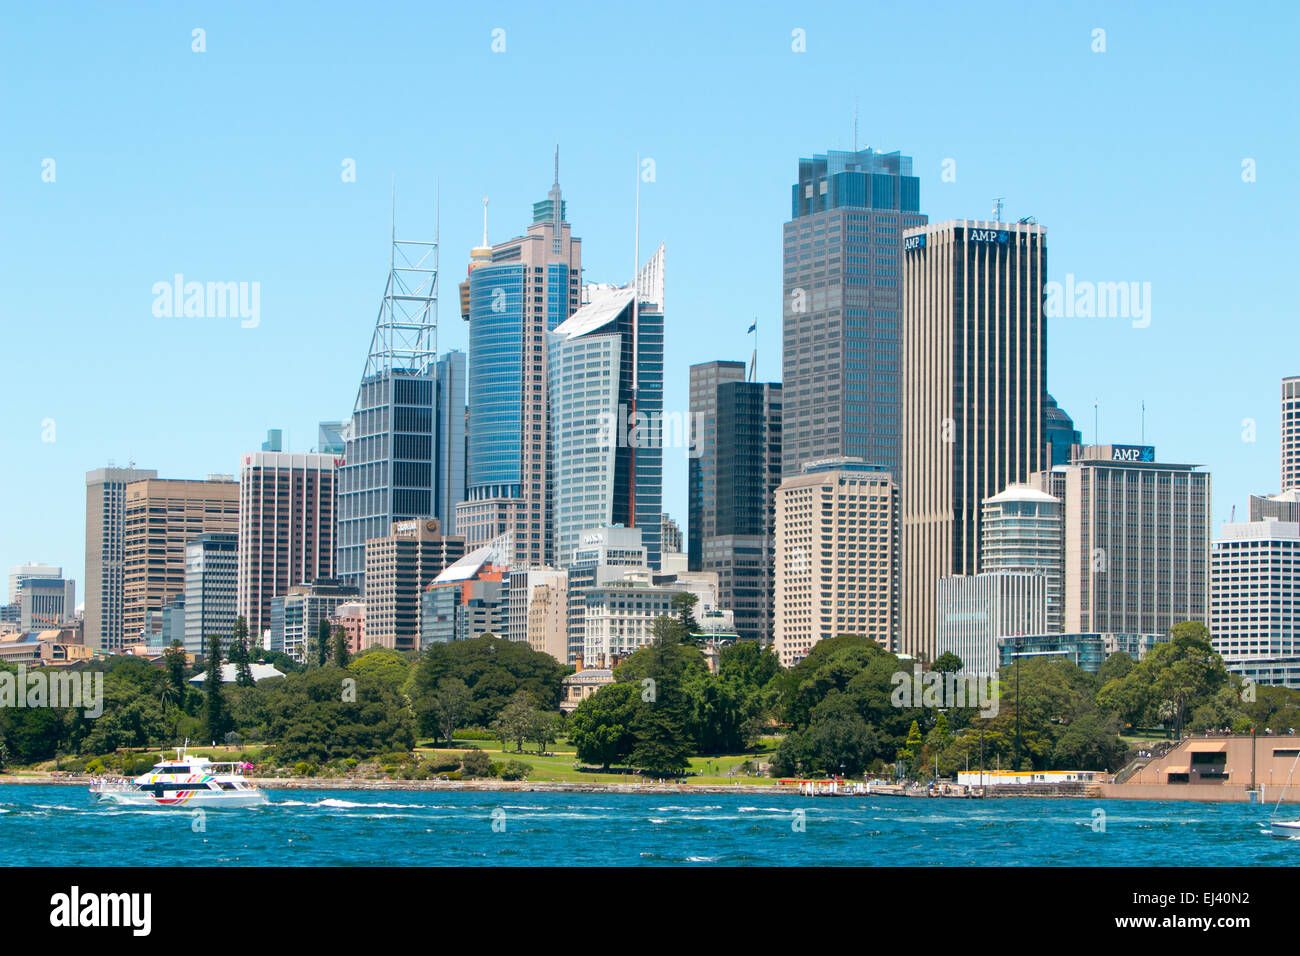 Sydney central business district skyline cityscape viewed from the harbour,Sydney Australia Stock Photo